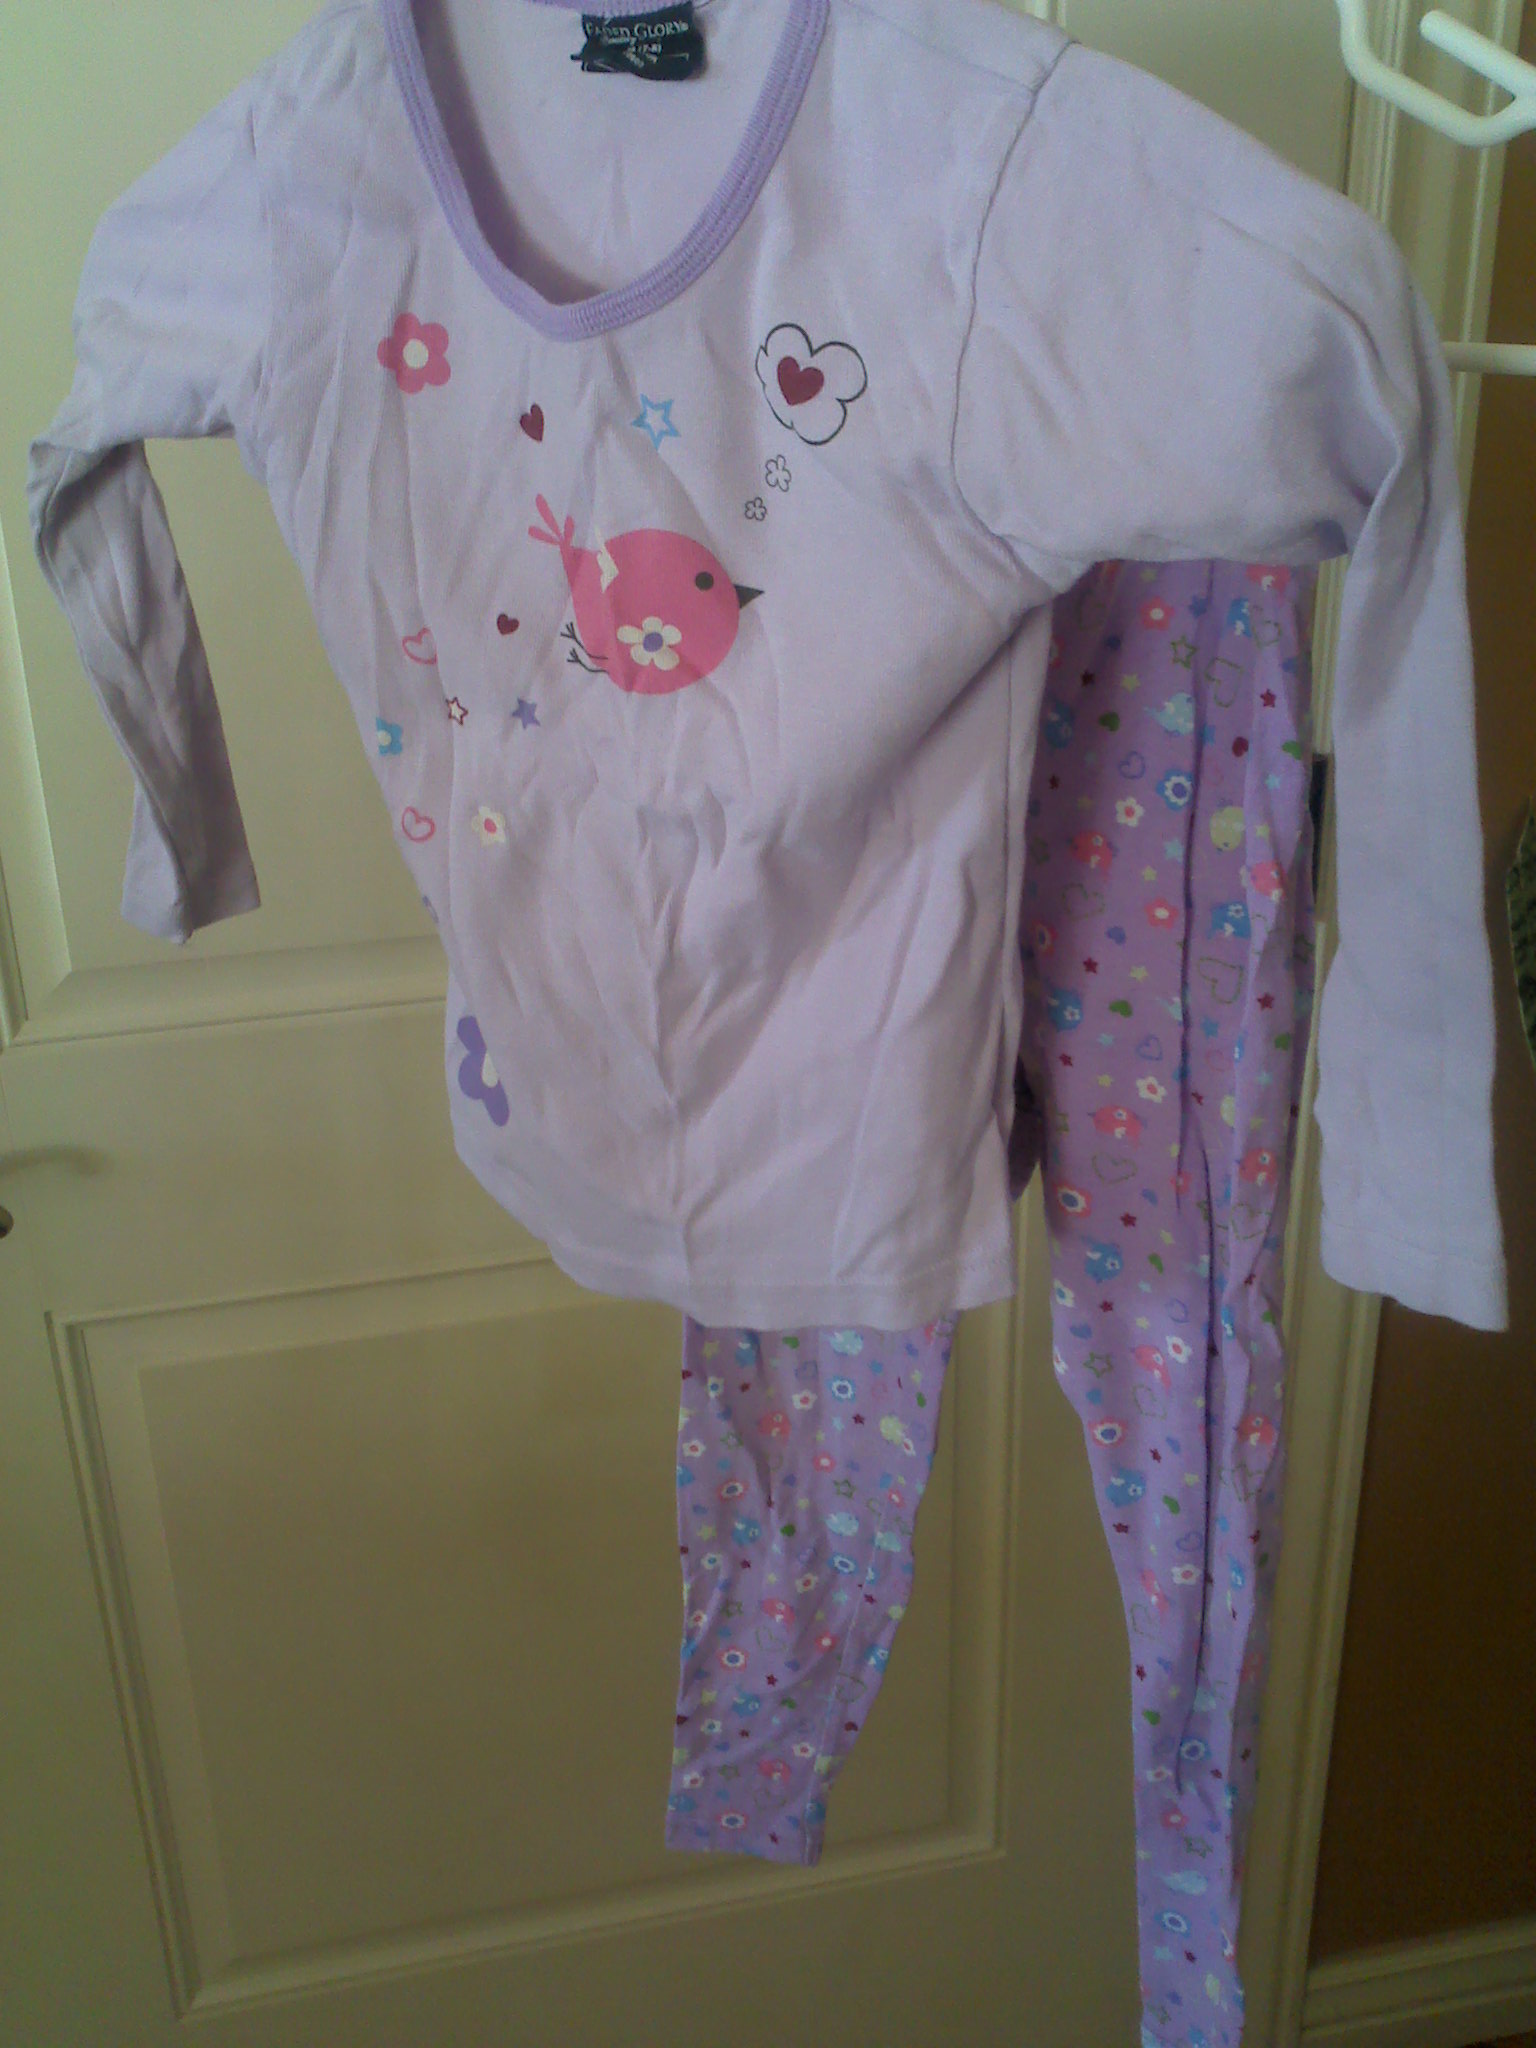 Girls shirt and pants set size M 7-8 in Wascopete's Garage Sale Tooele, UT